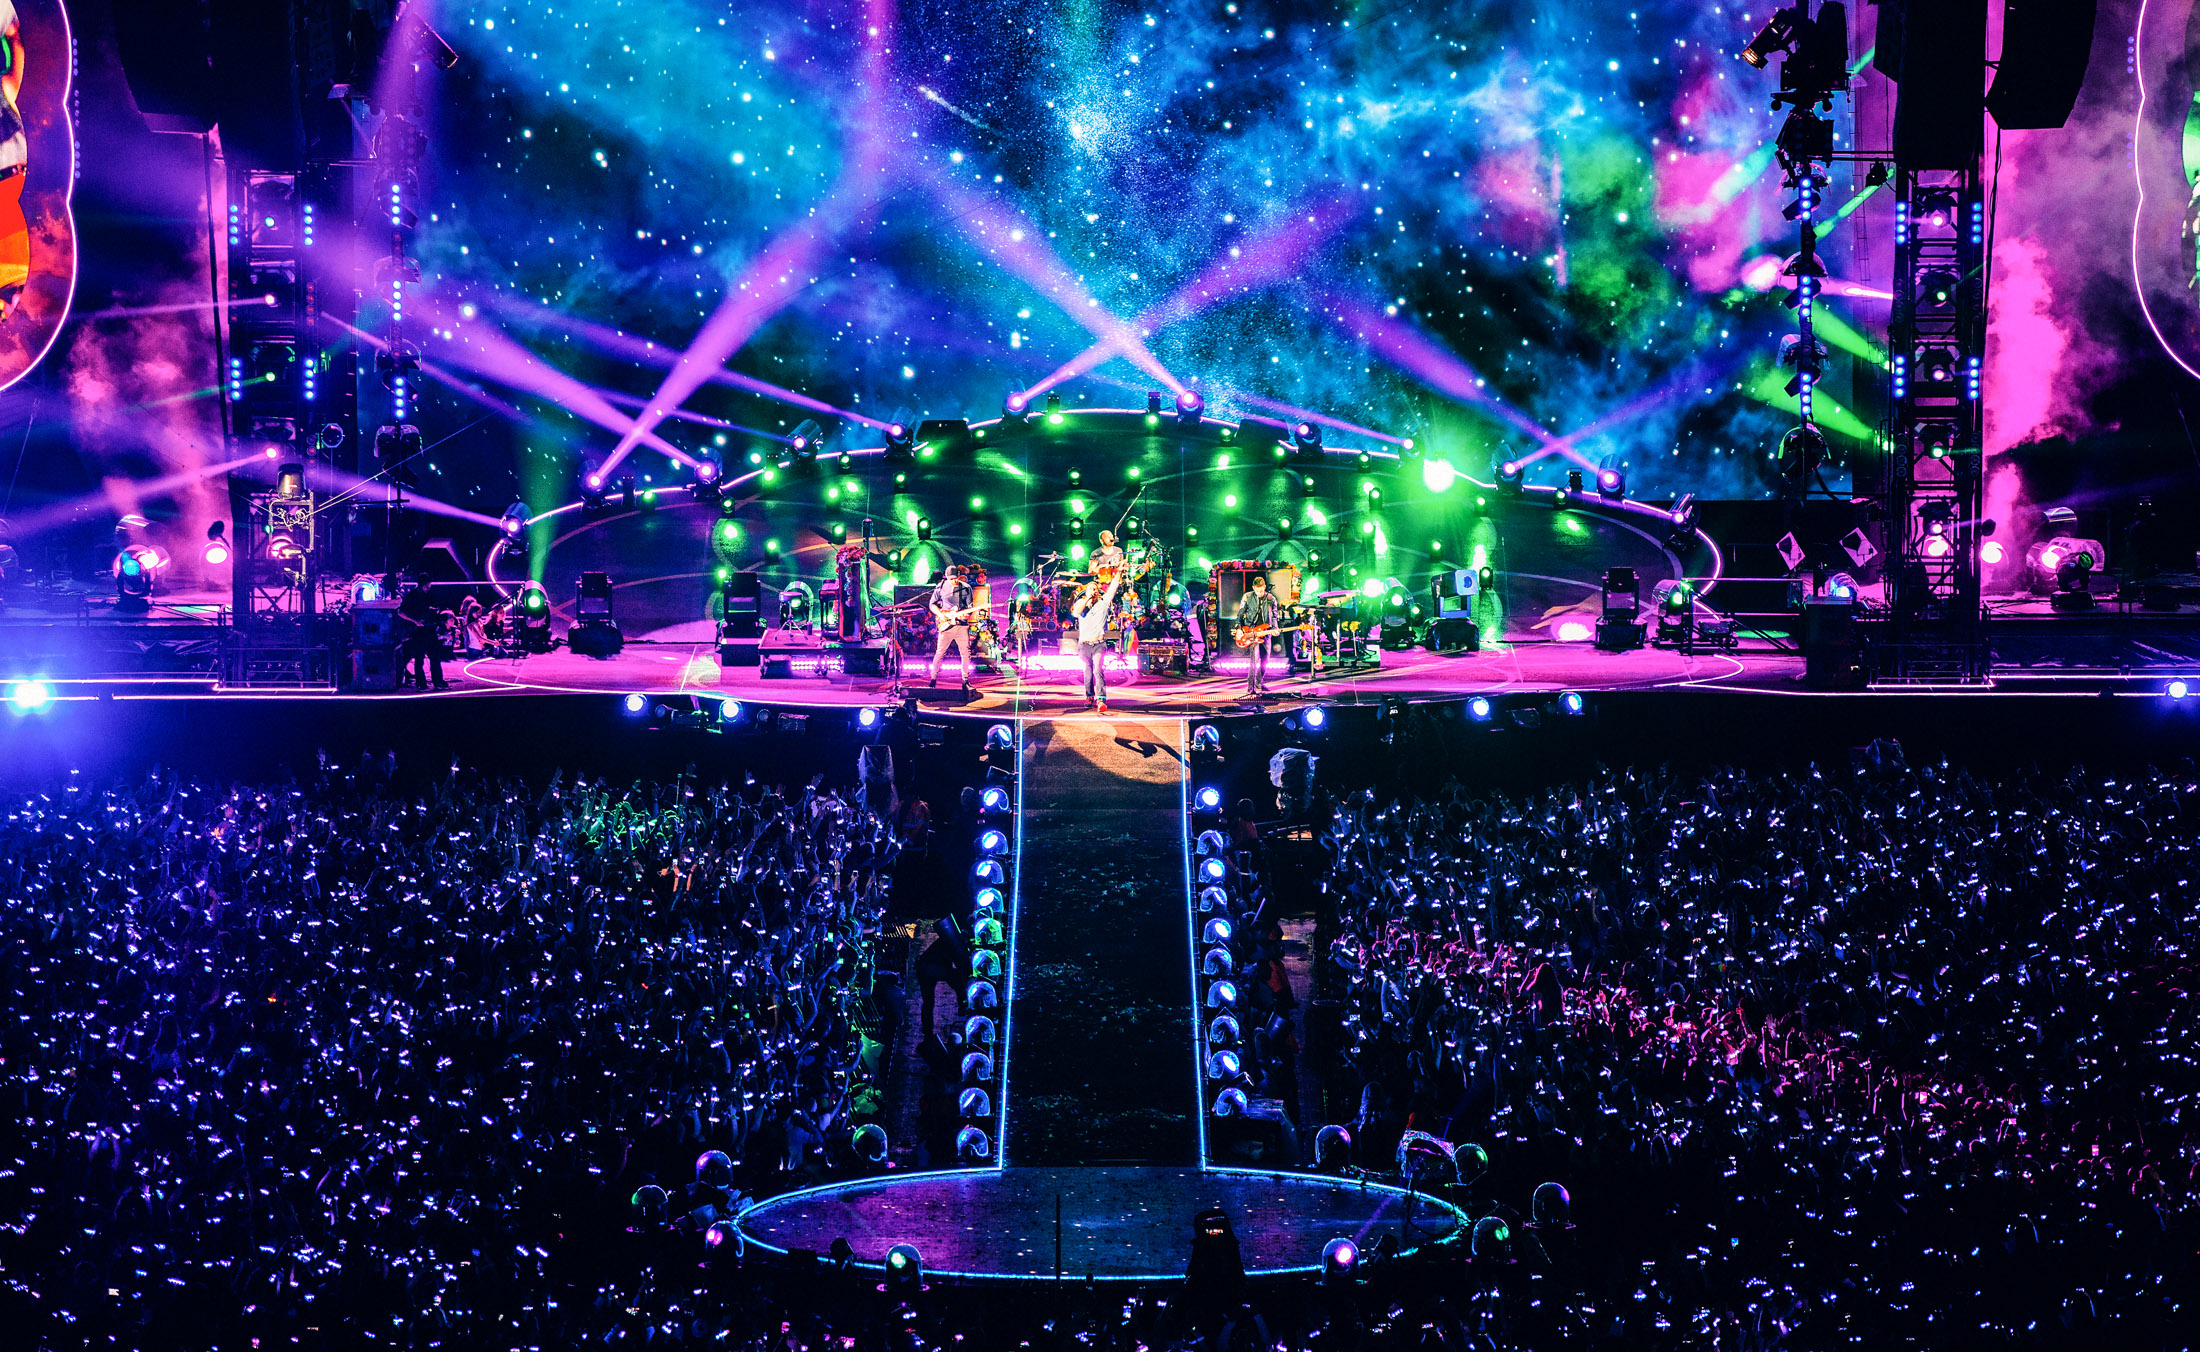 Coldplay's 'A Head Full of Dreams' Tour Returns With Xylobands LED